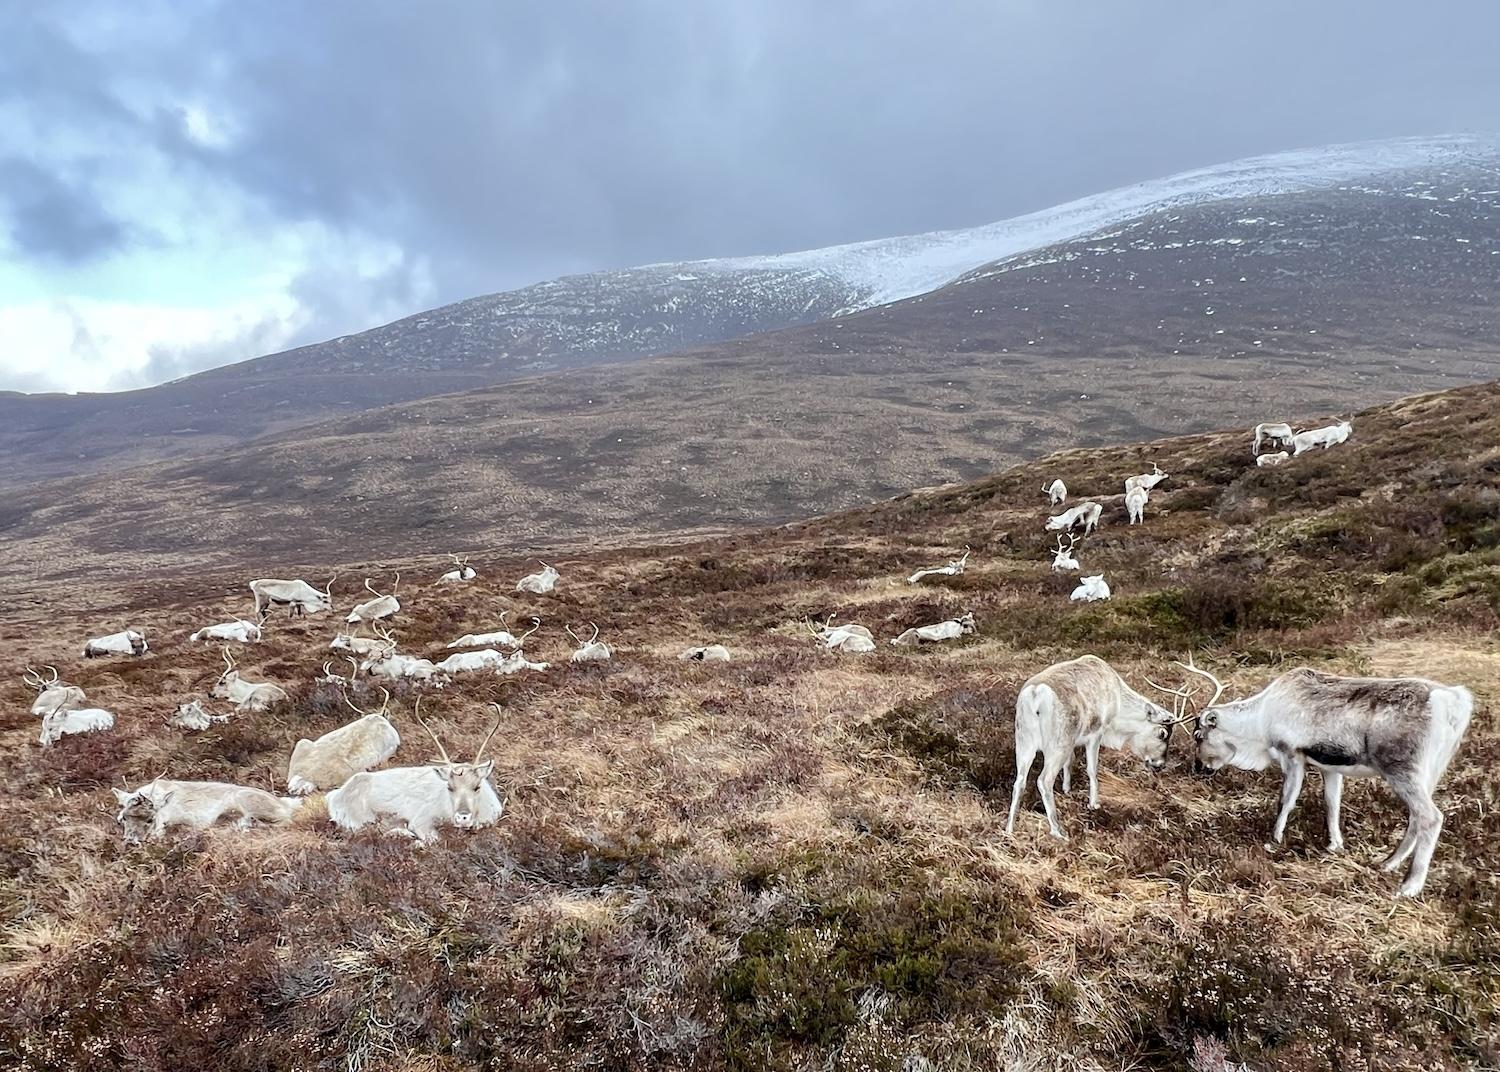 Nuii and Helsinki butt heads as the Cairngorm Reindeer Herd rests on the mountainside in March in the Scottish Highlands.